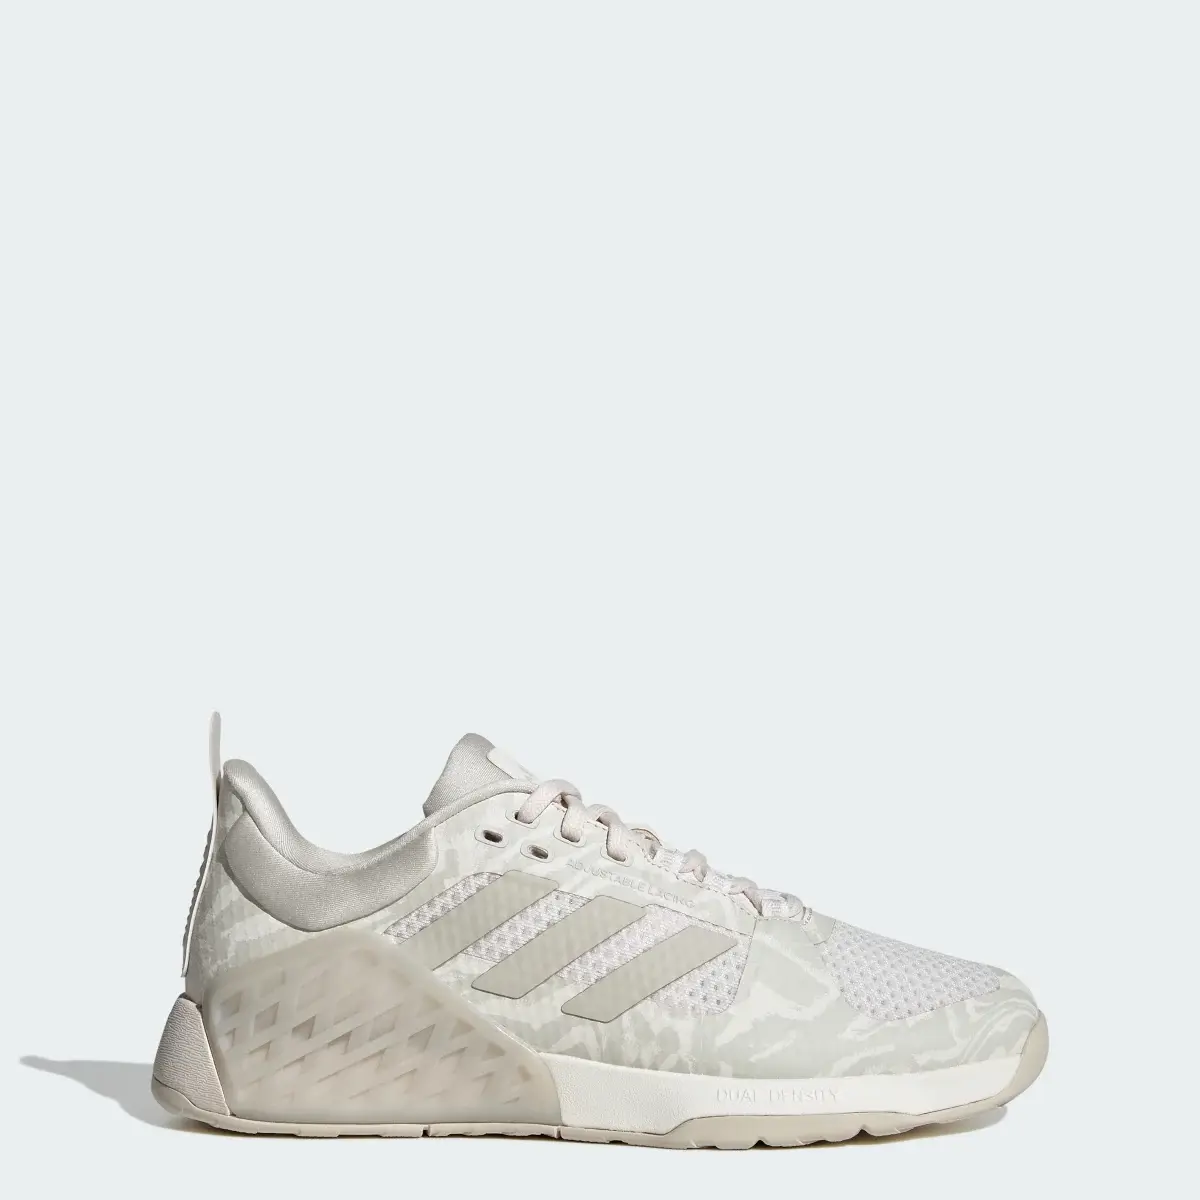 Adidas Dropset 2 Trainers. 1